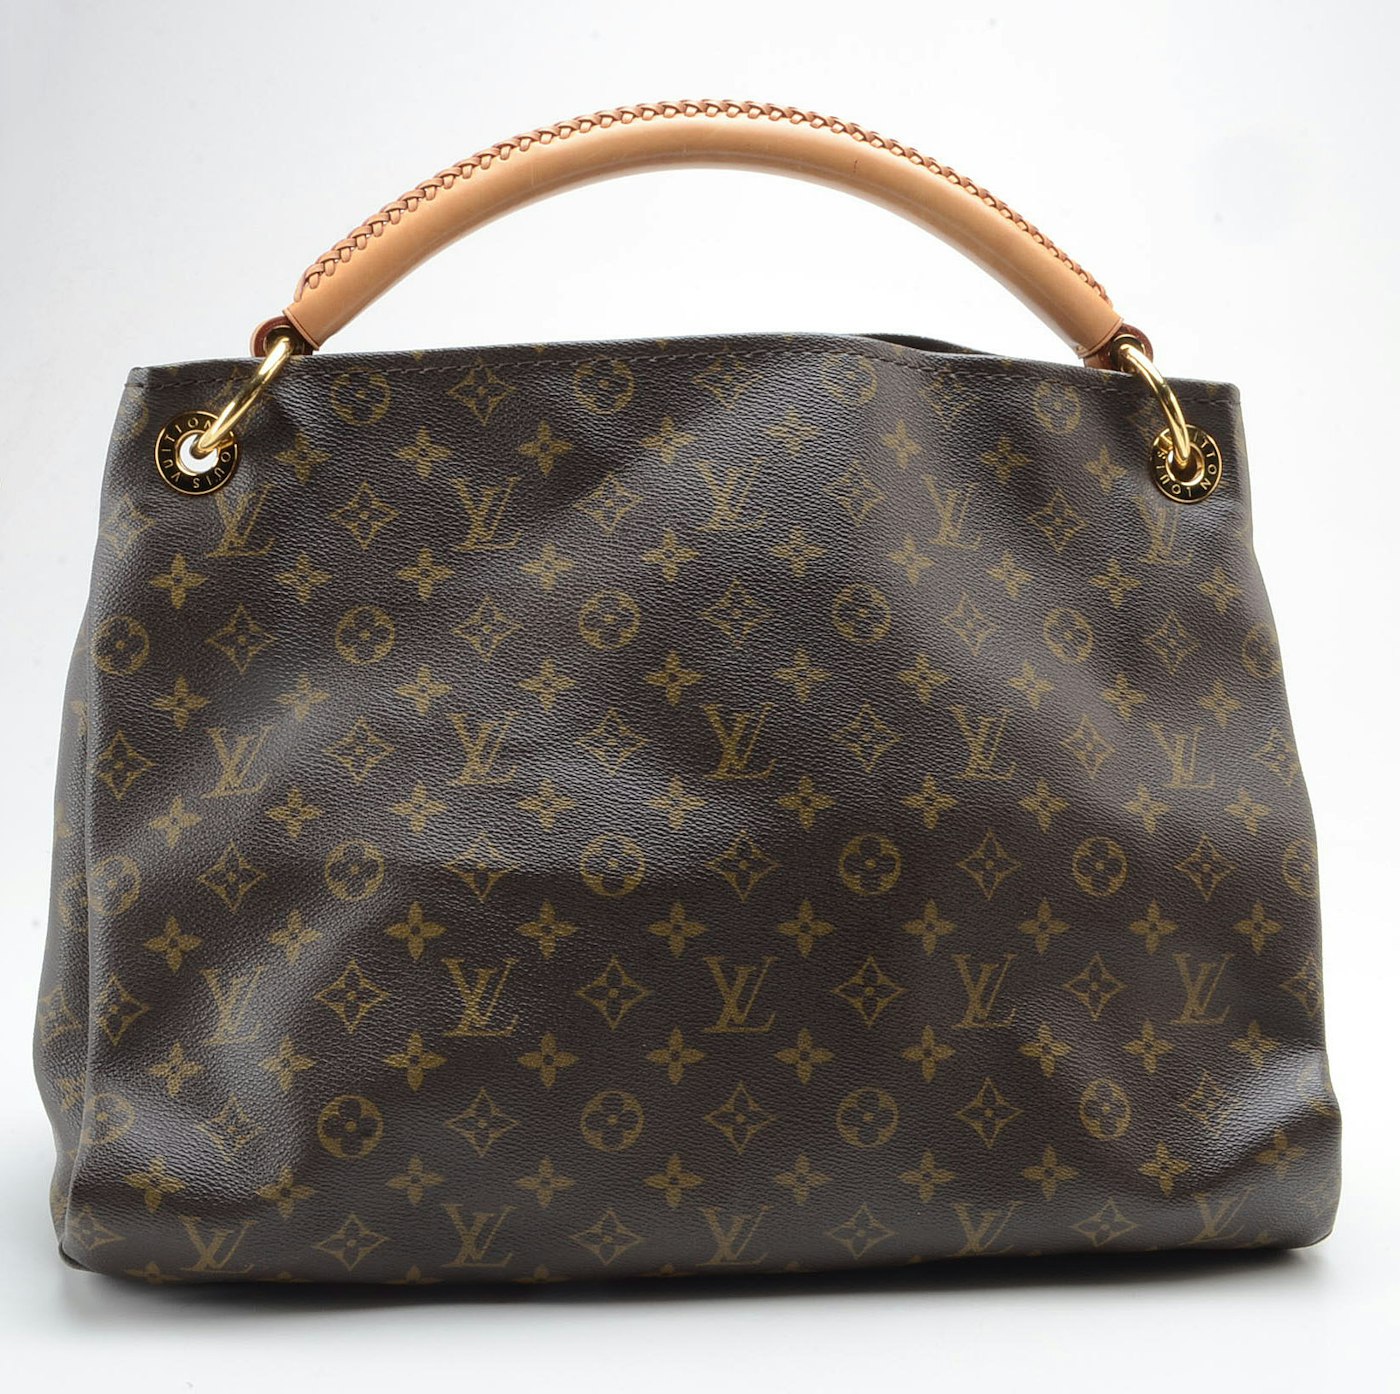 Louis Vuitton Bags: A Guide Before You Buy